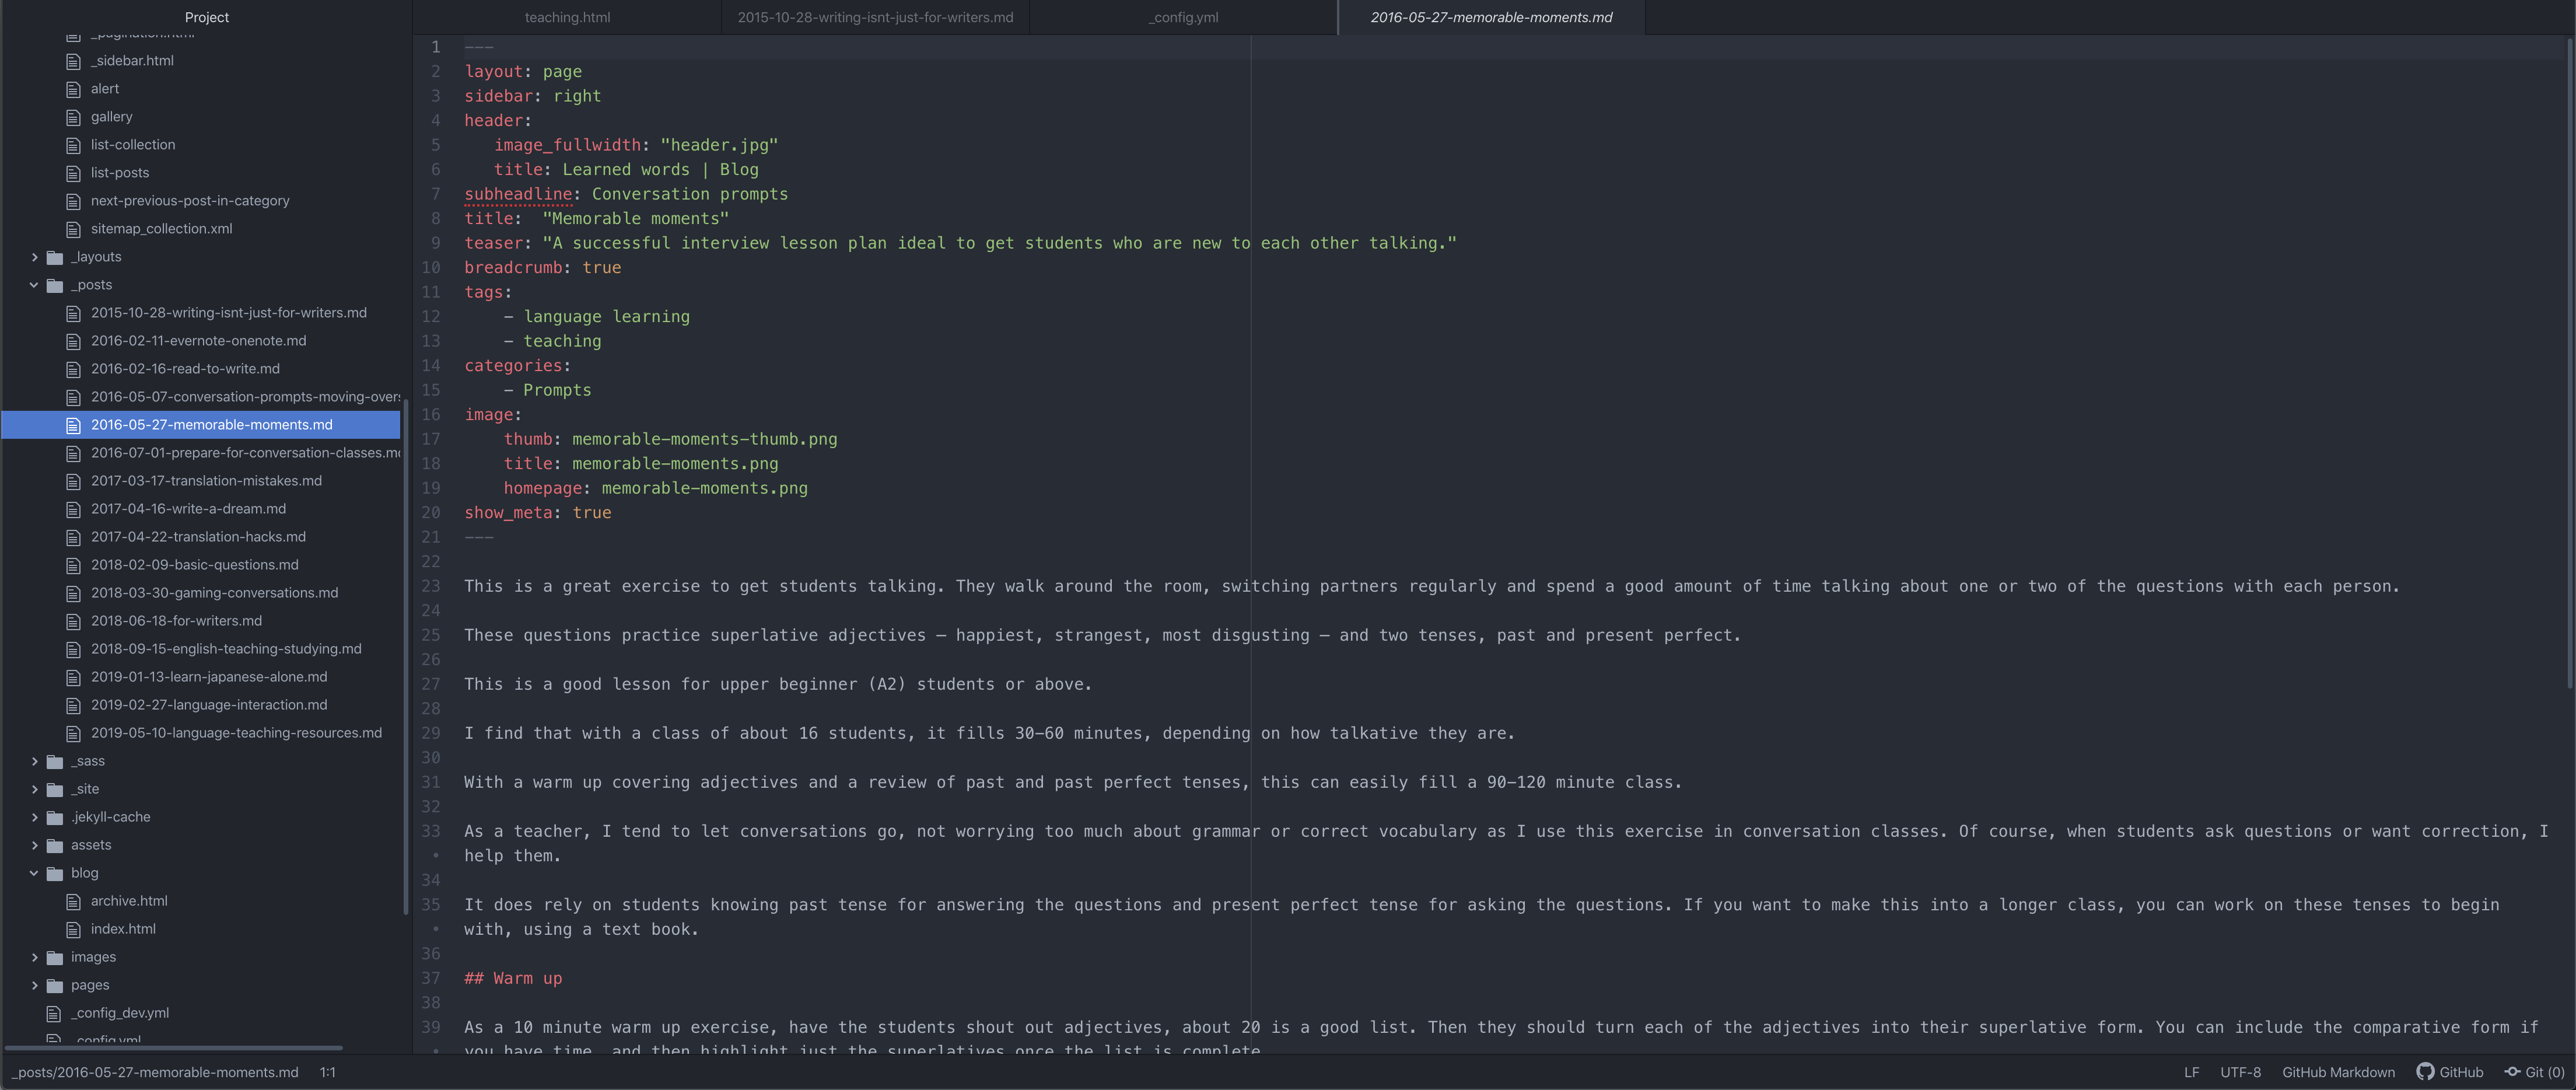 Atom was a fabulous editor for writing in Markdown for a Jekyll website